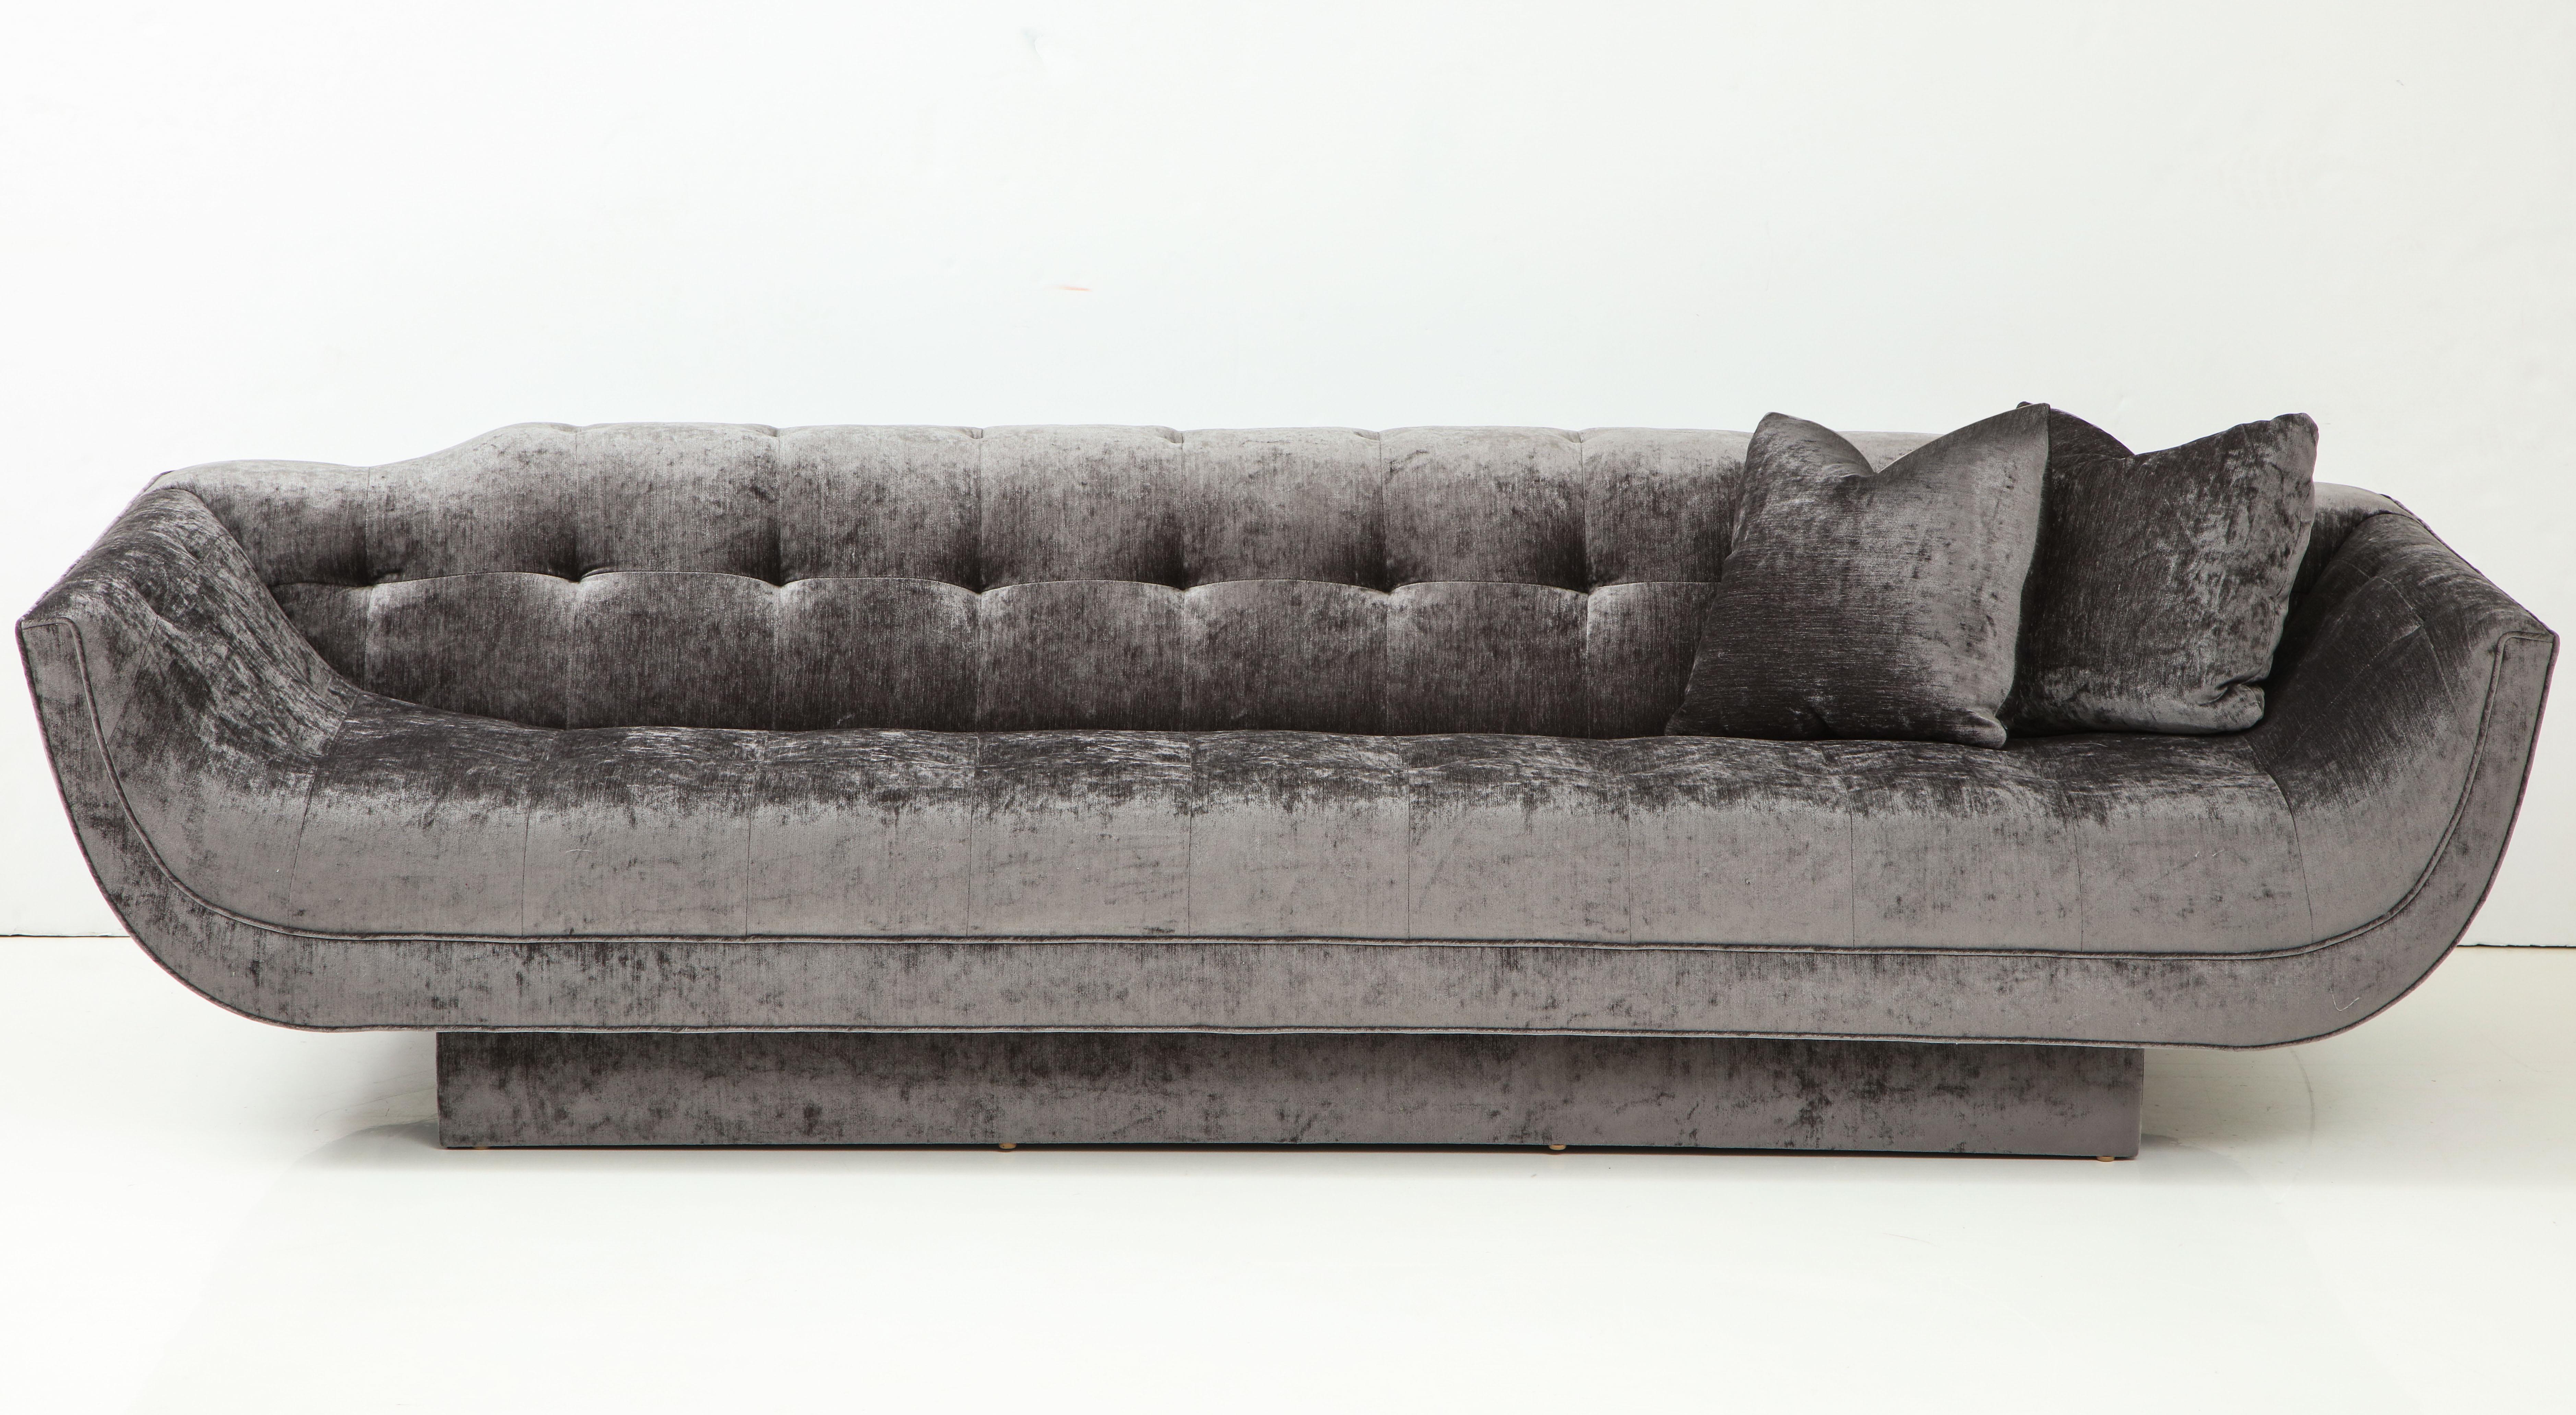 Glamorous Hollywood Regency style sofa by Adrian Pearsall.
The sofa has been beautifully reupholstered in a luxurious
grey chenille velvet fabric.